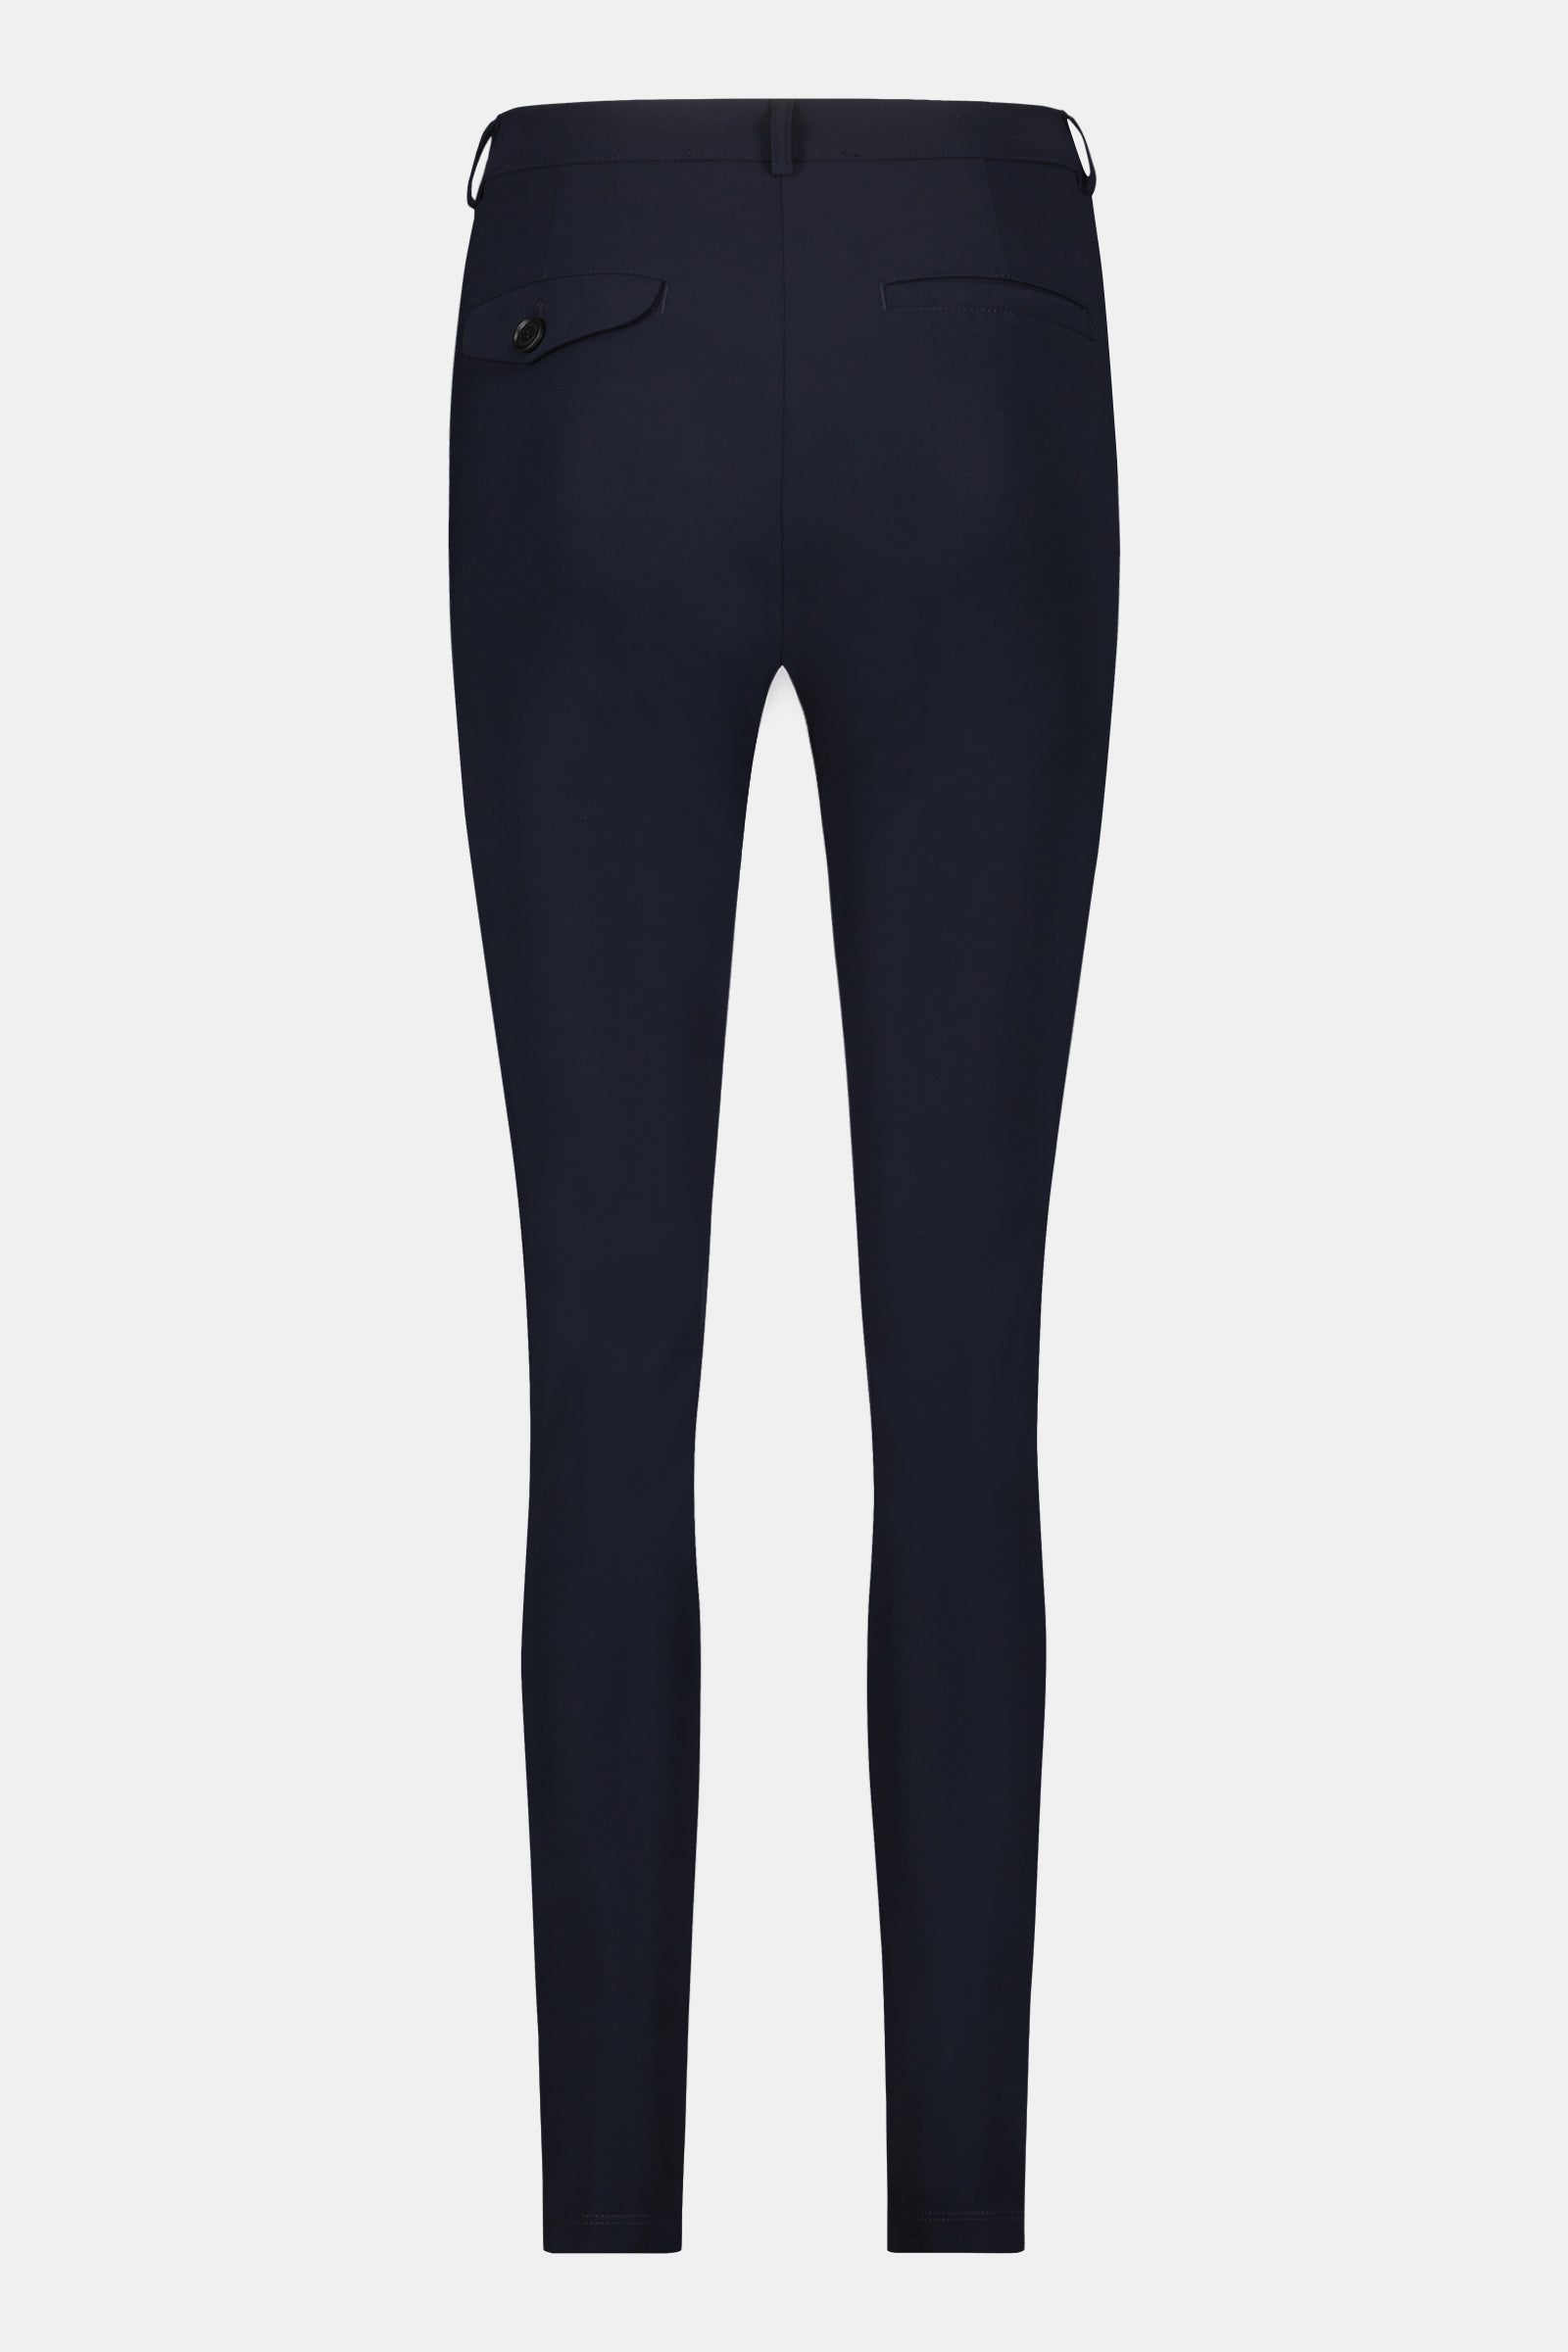 TROUSERS (ROSY) NAVY